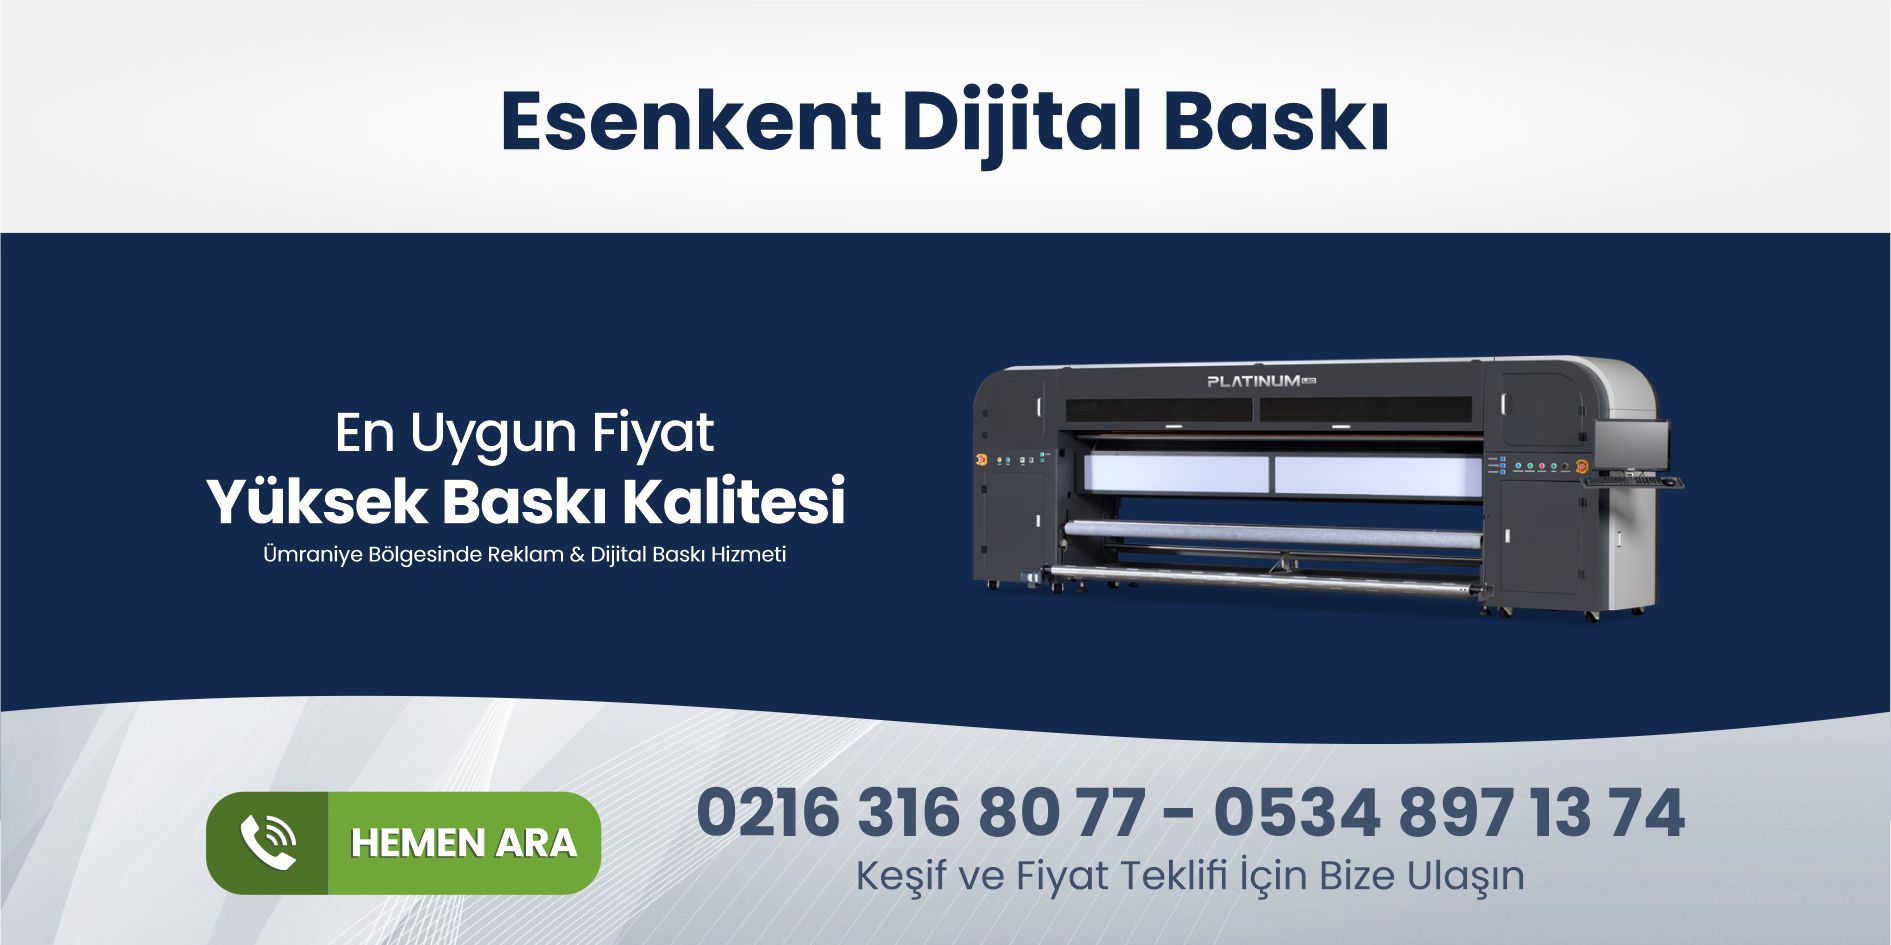 You are currently viewing Esenkent Dijital Baskı